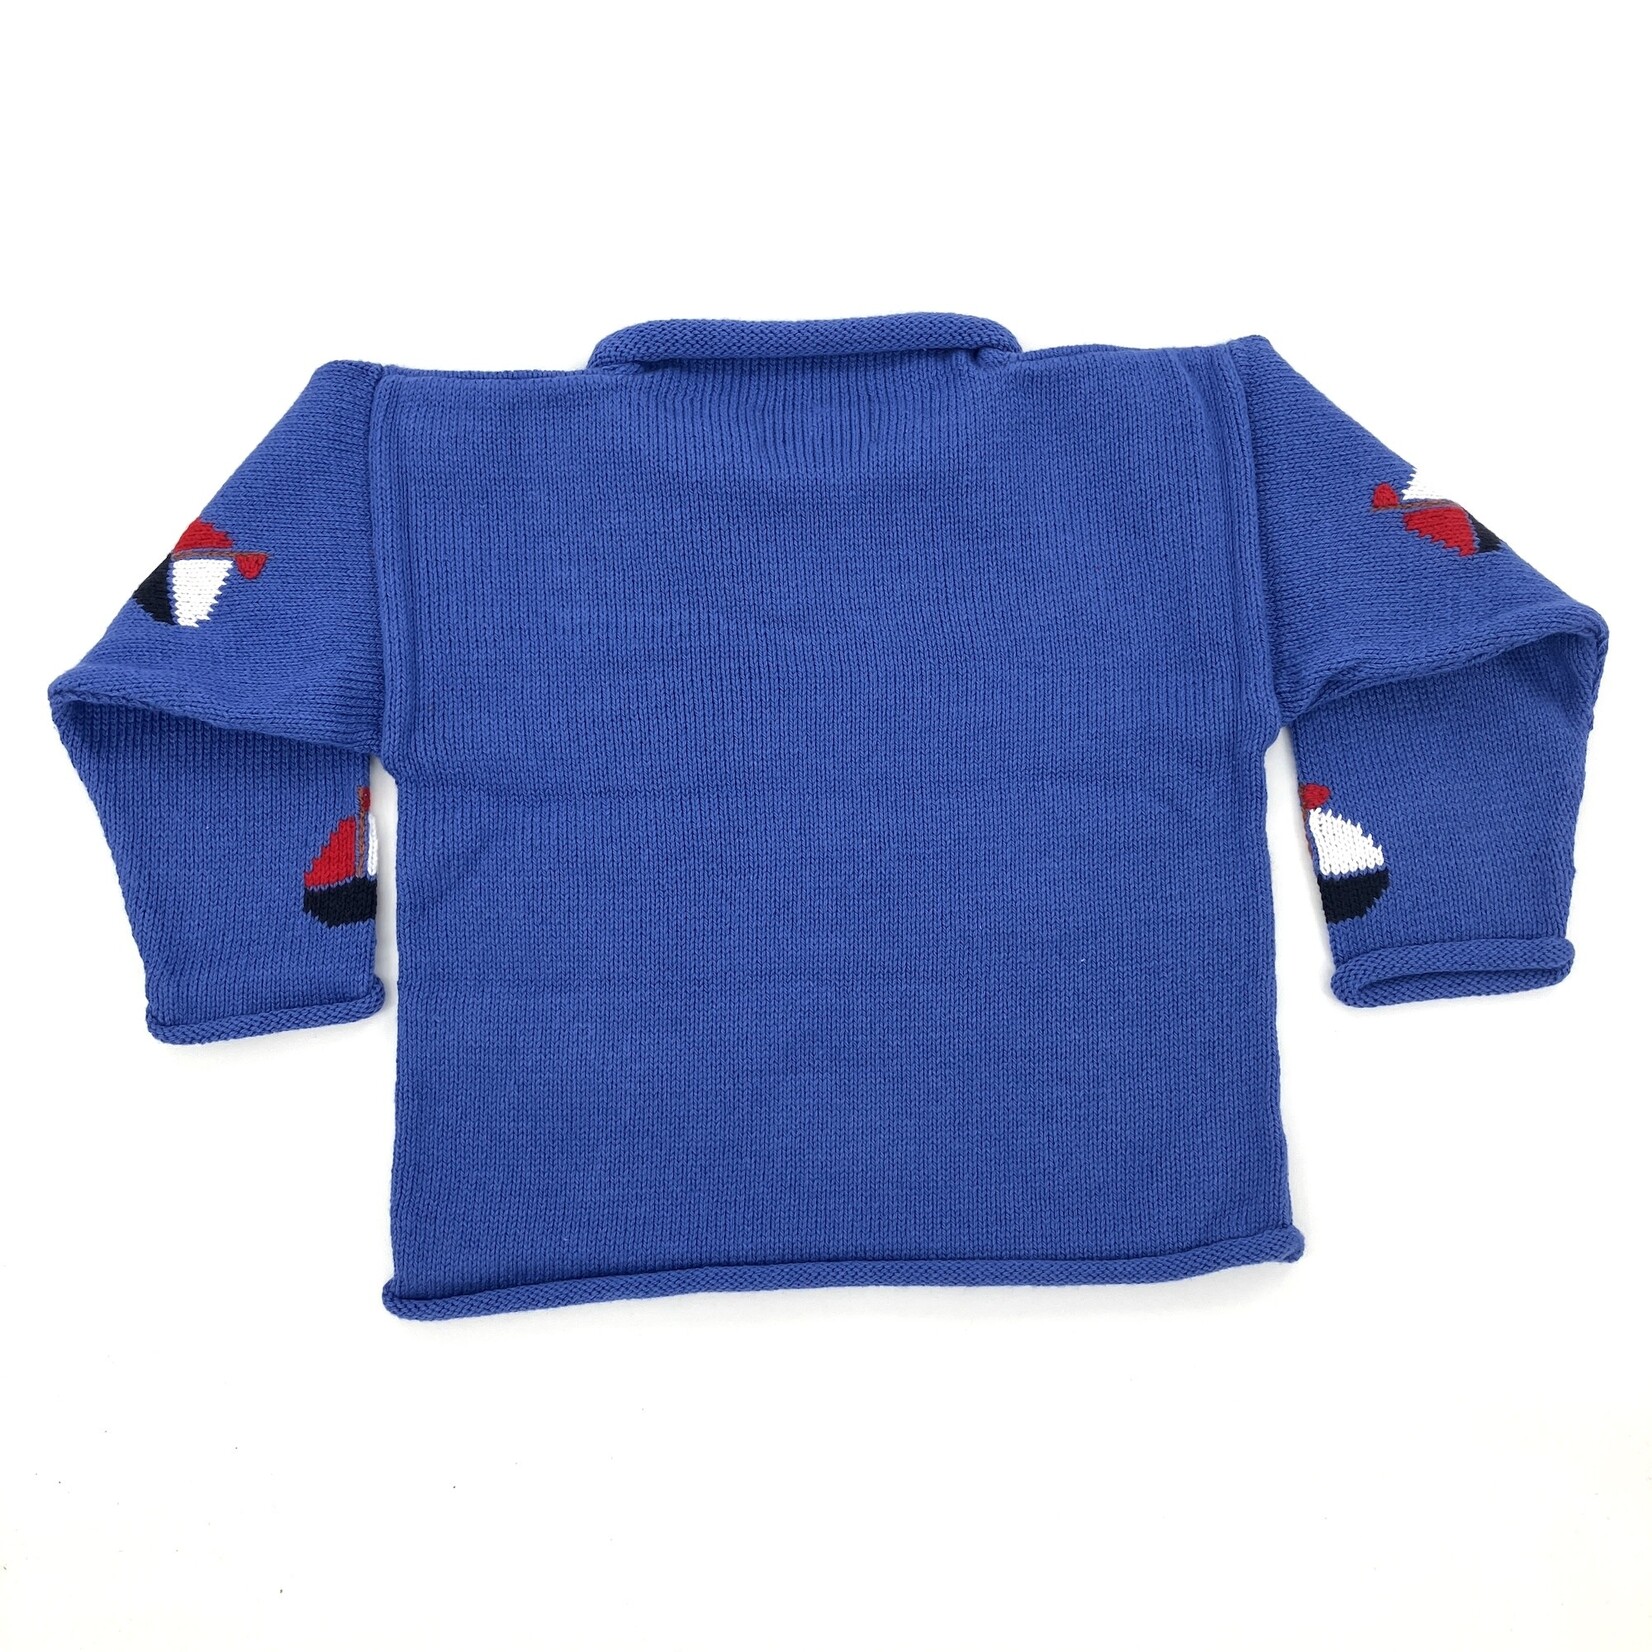 ACVISA/CLAVER Blue Sweater w/ Red Sailboat